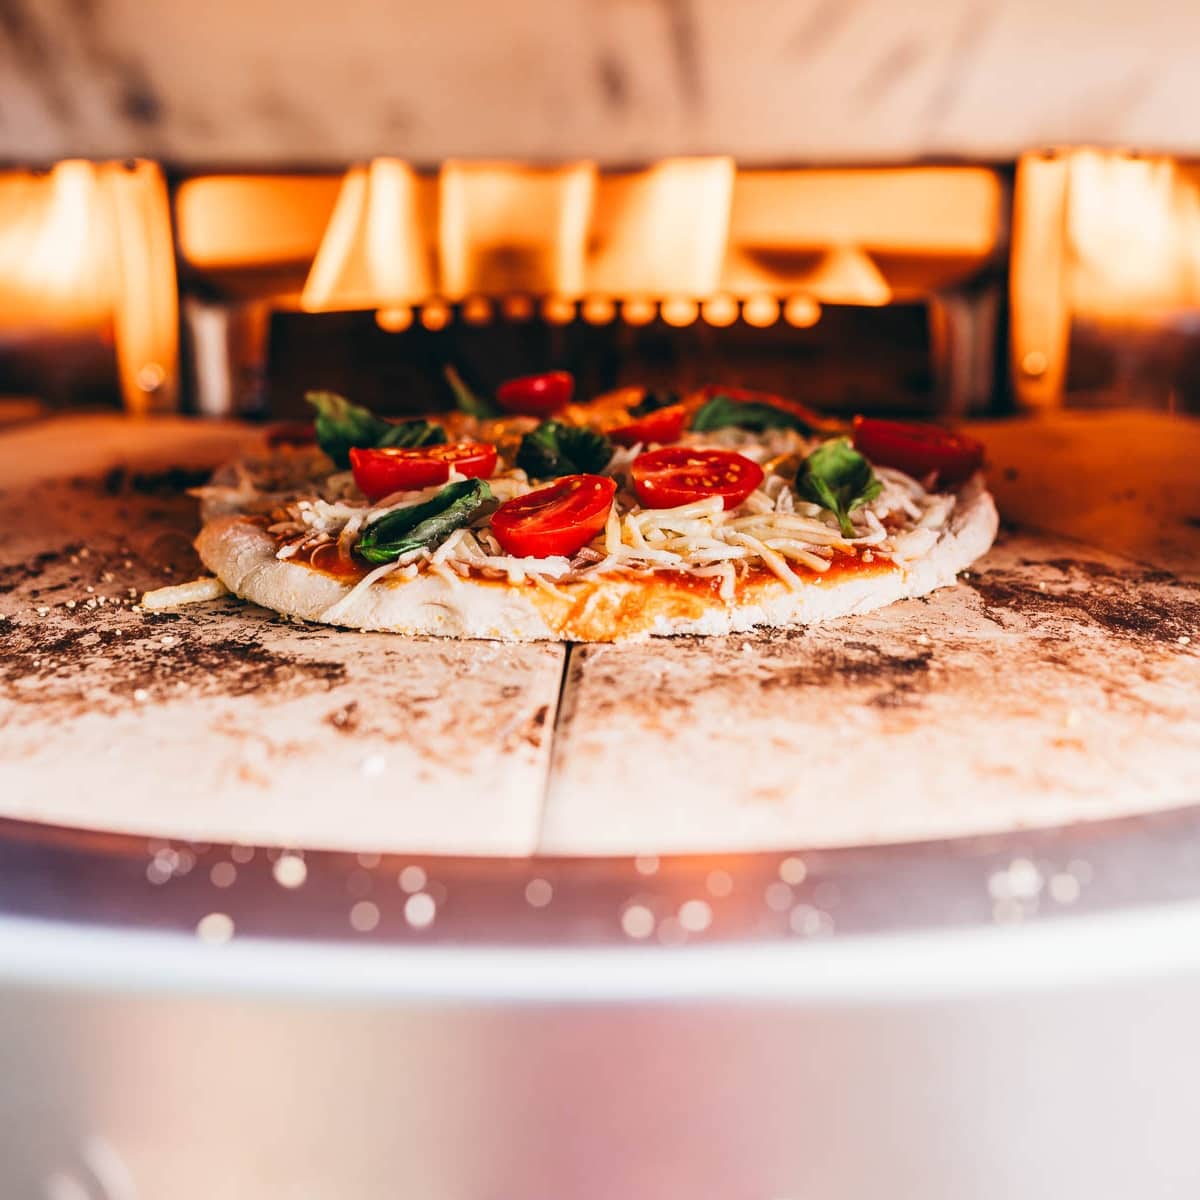 A pizza is being cooked in a solo stove pizza oven.